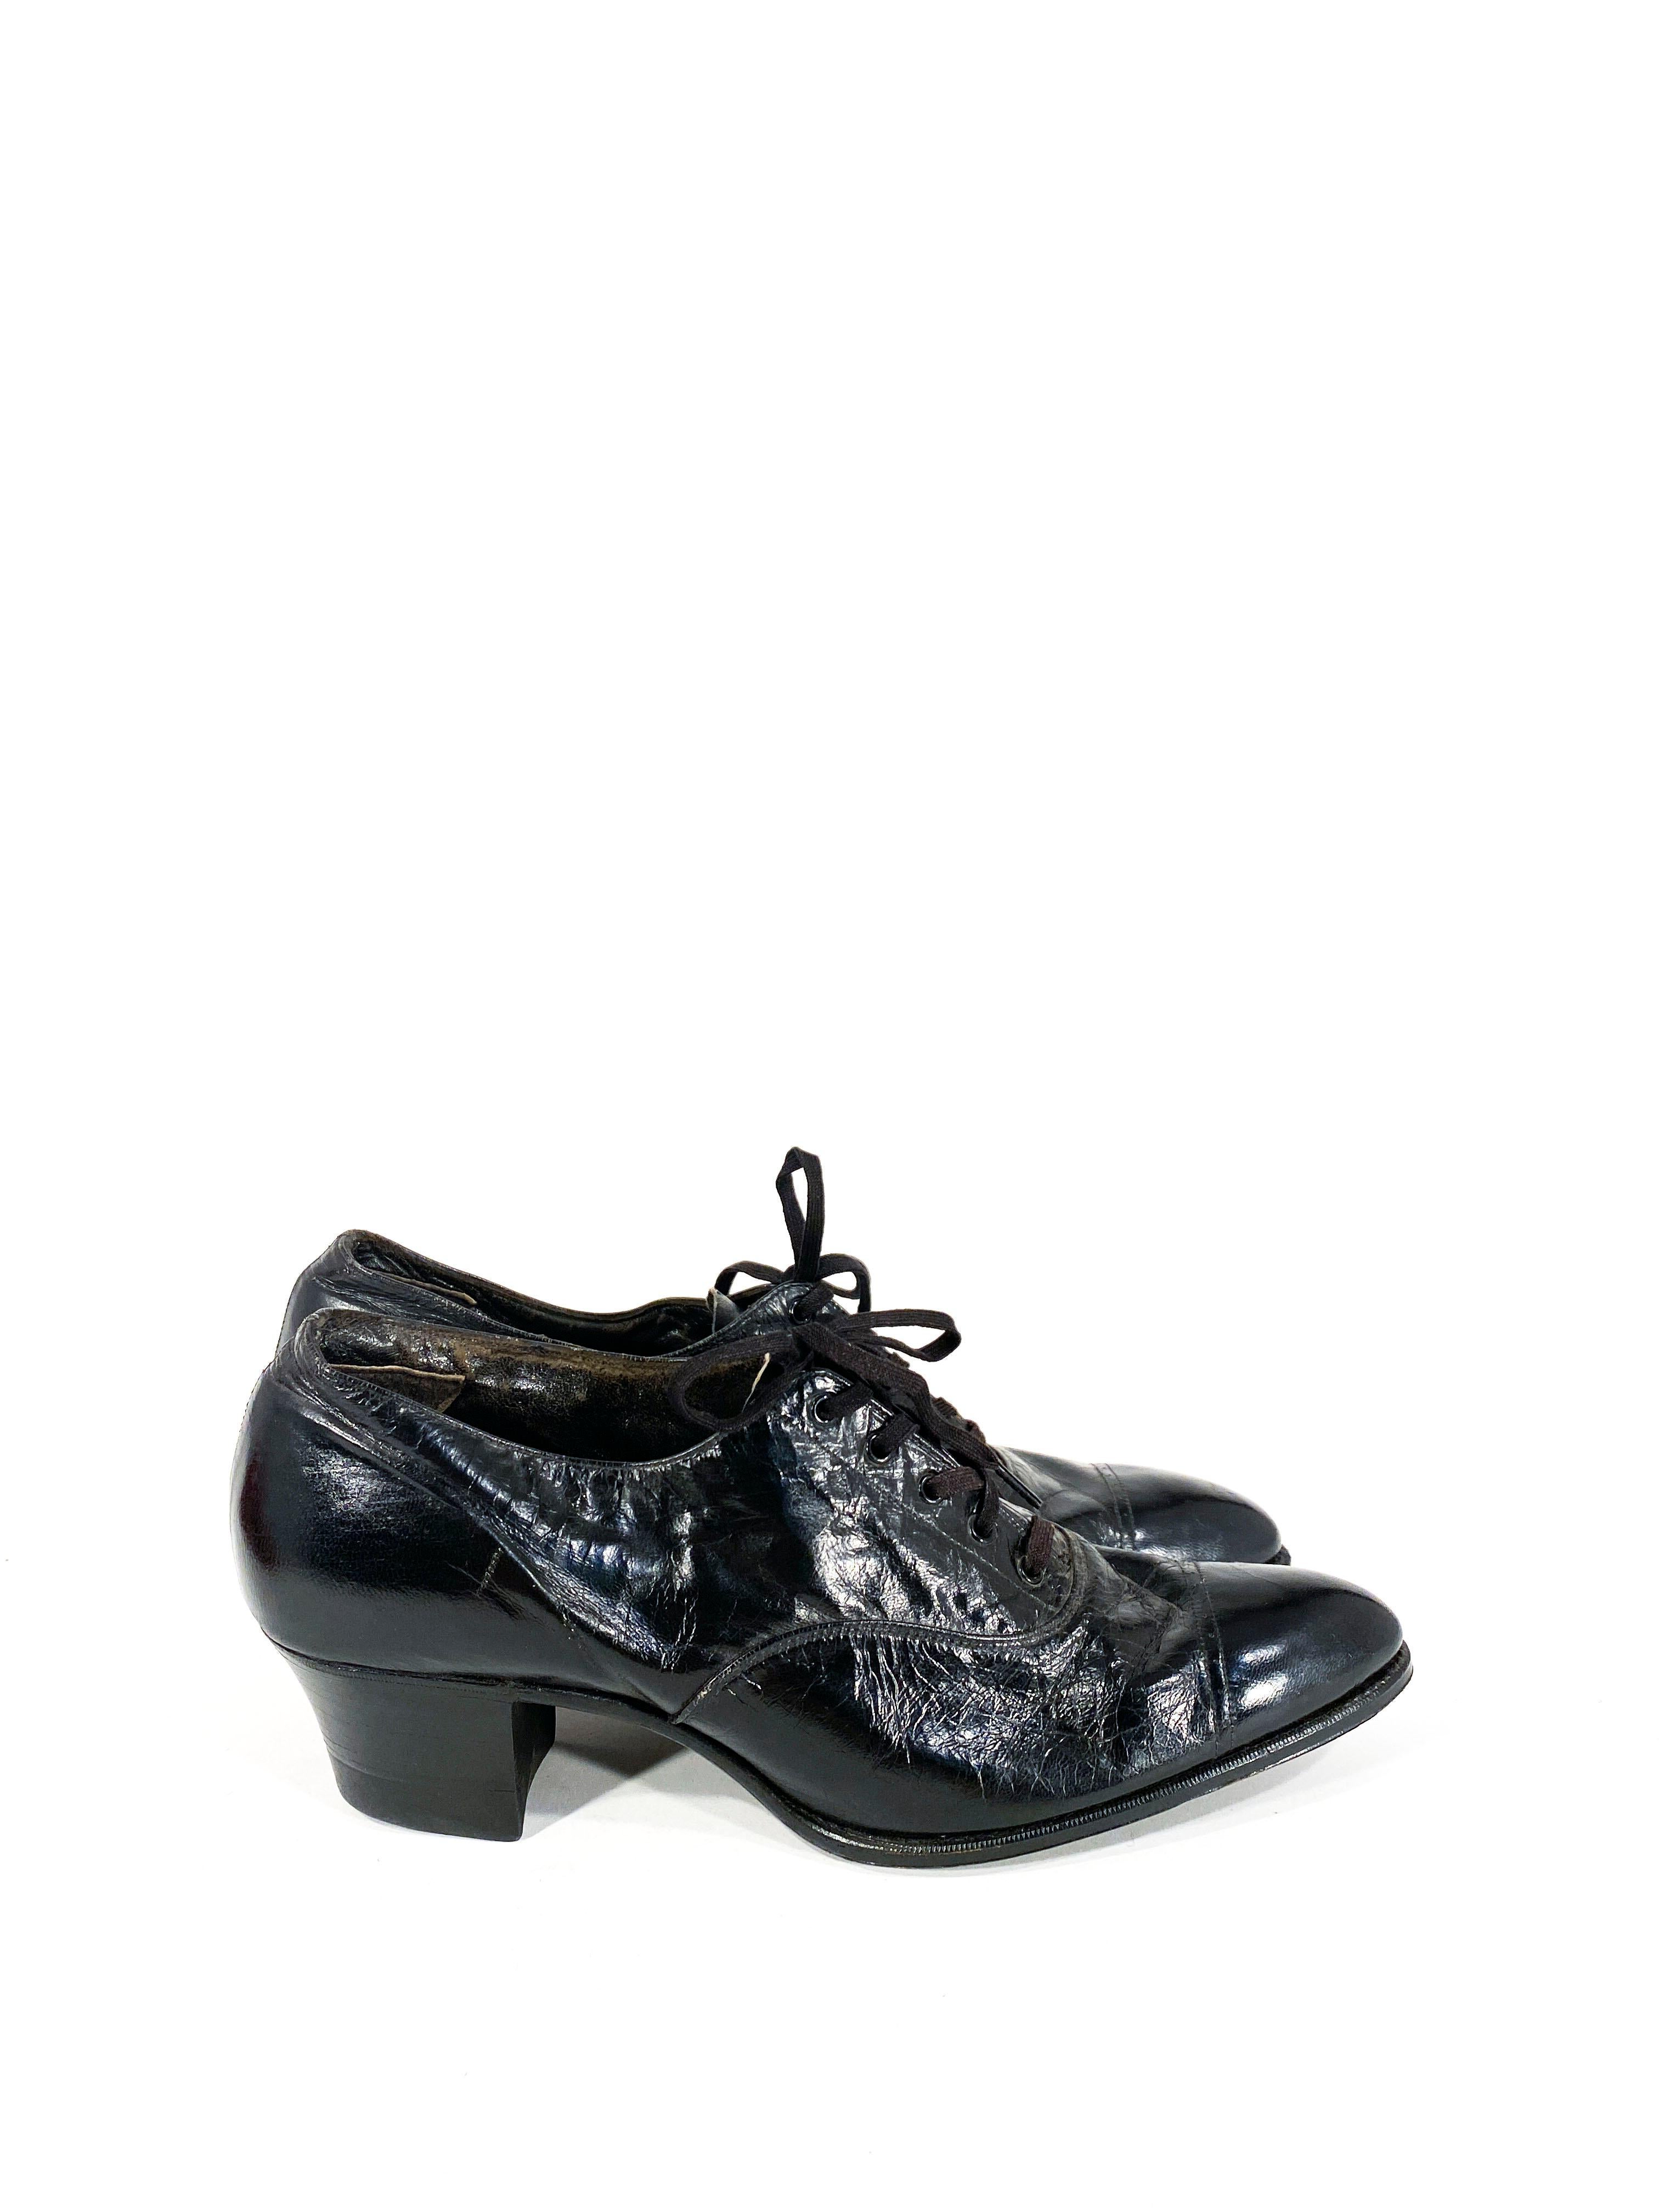 patent leather work shoes